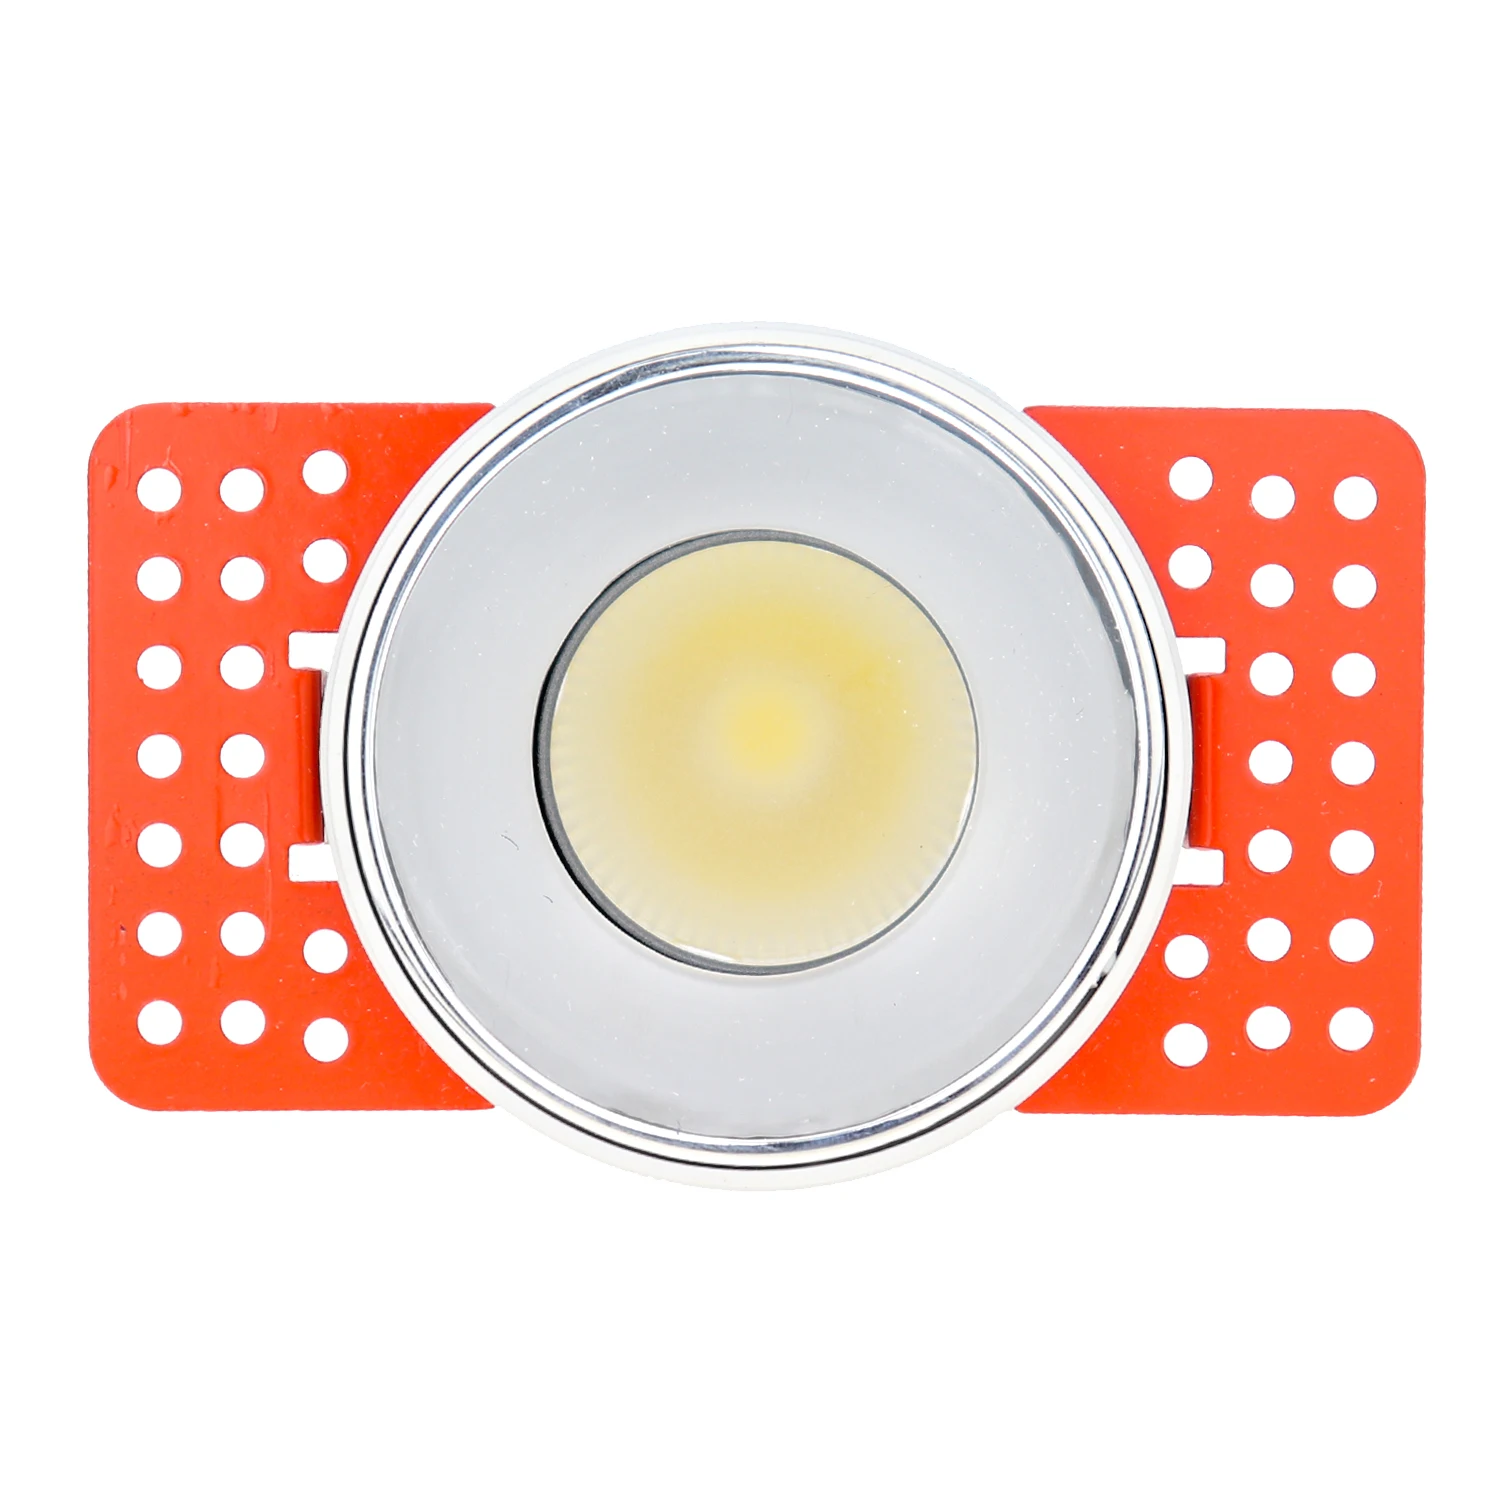 10w Living Room Trimless Dimmable Recessed Focusable Ceilling LED Spot Light Spotlight Adjustable for Home